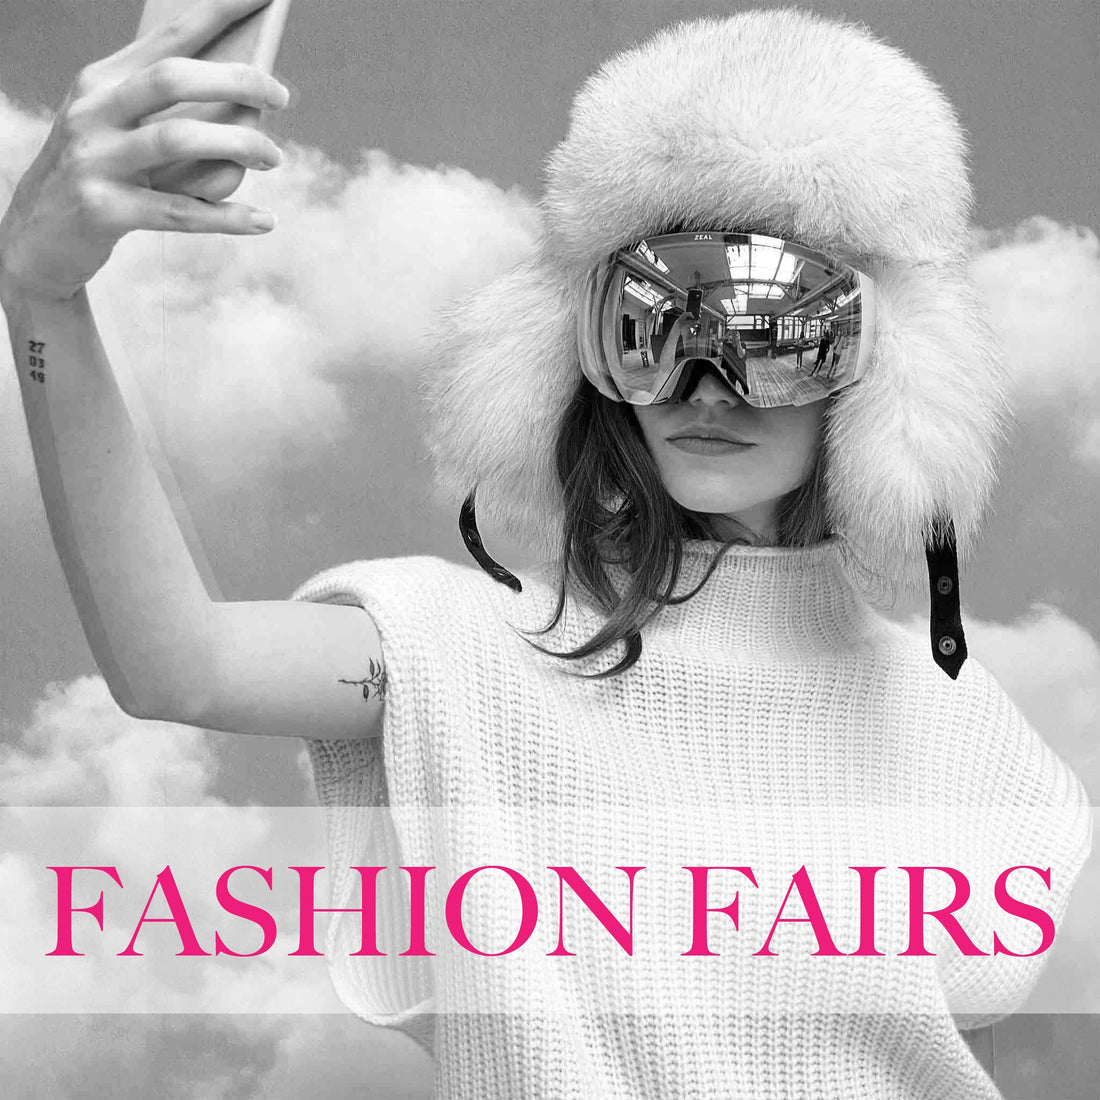 SAVE THE DATE - VISIT OUR BRAND ON THESE FAIRS THIS YEAR